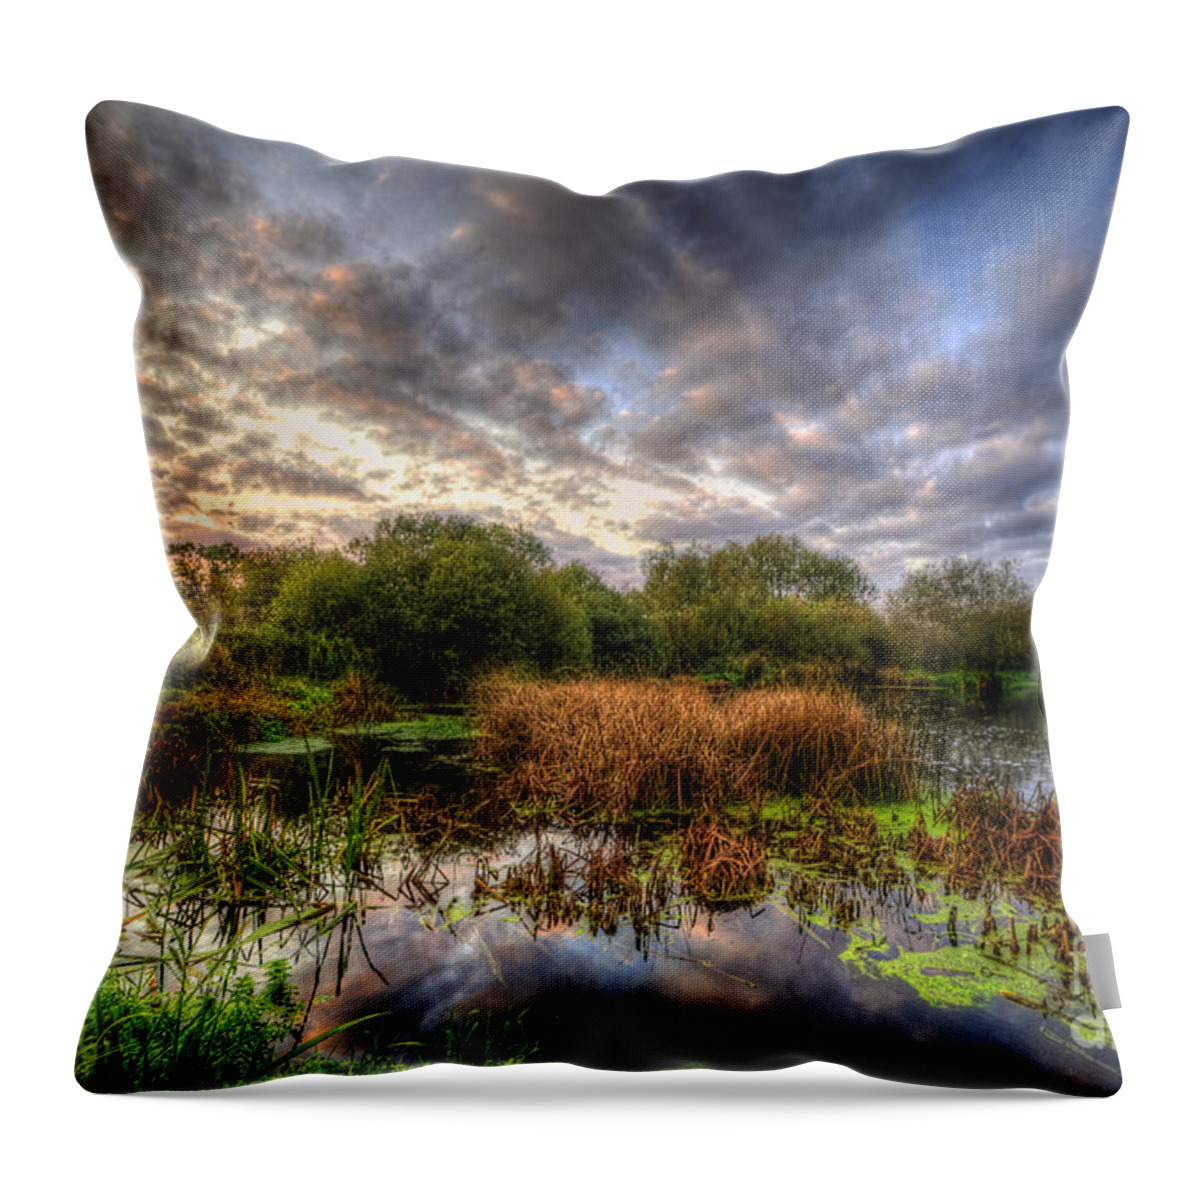 Hdr Throw Pillow featuring the photograph Swampy by Yhun Suarez